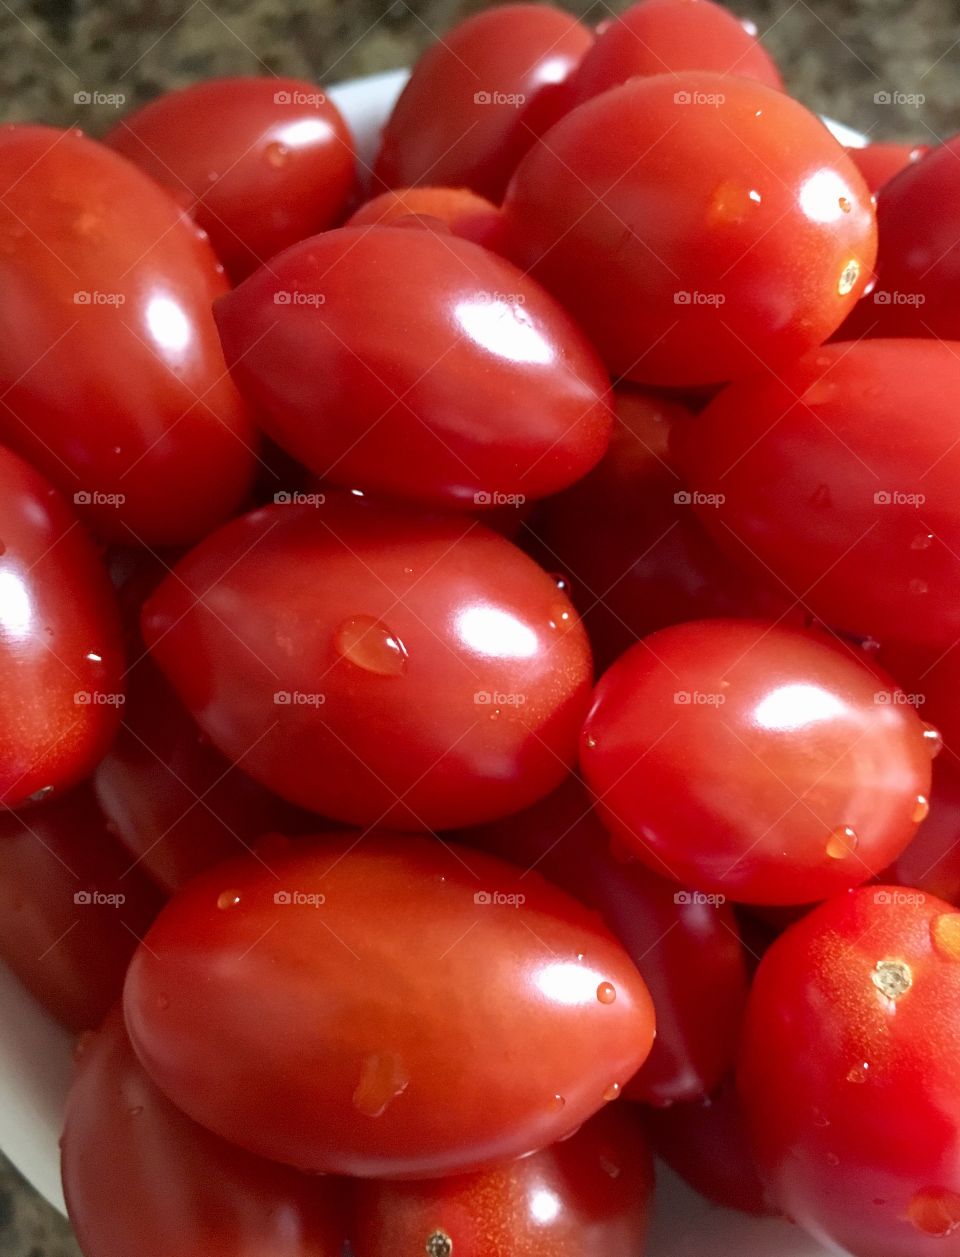 Grape Tomatoes in a pile and freshly washed.  